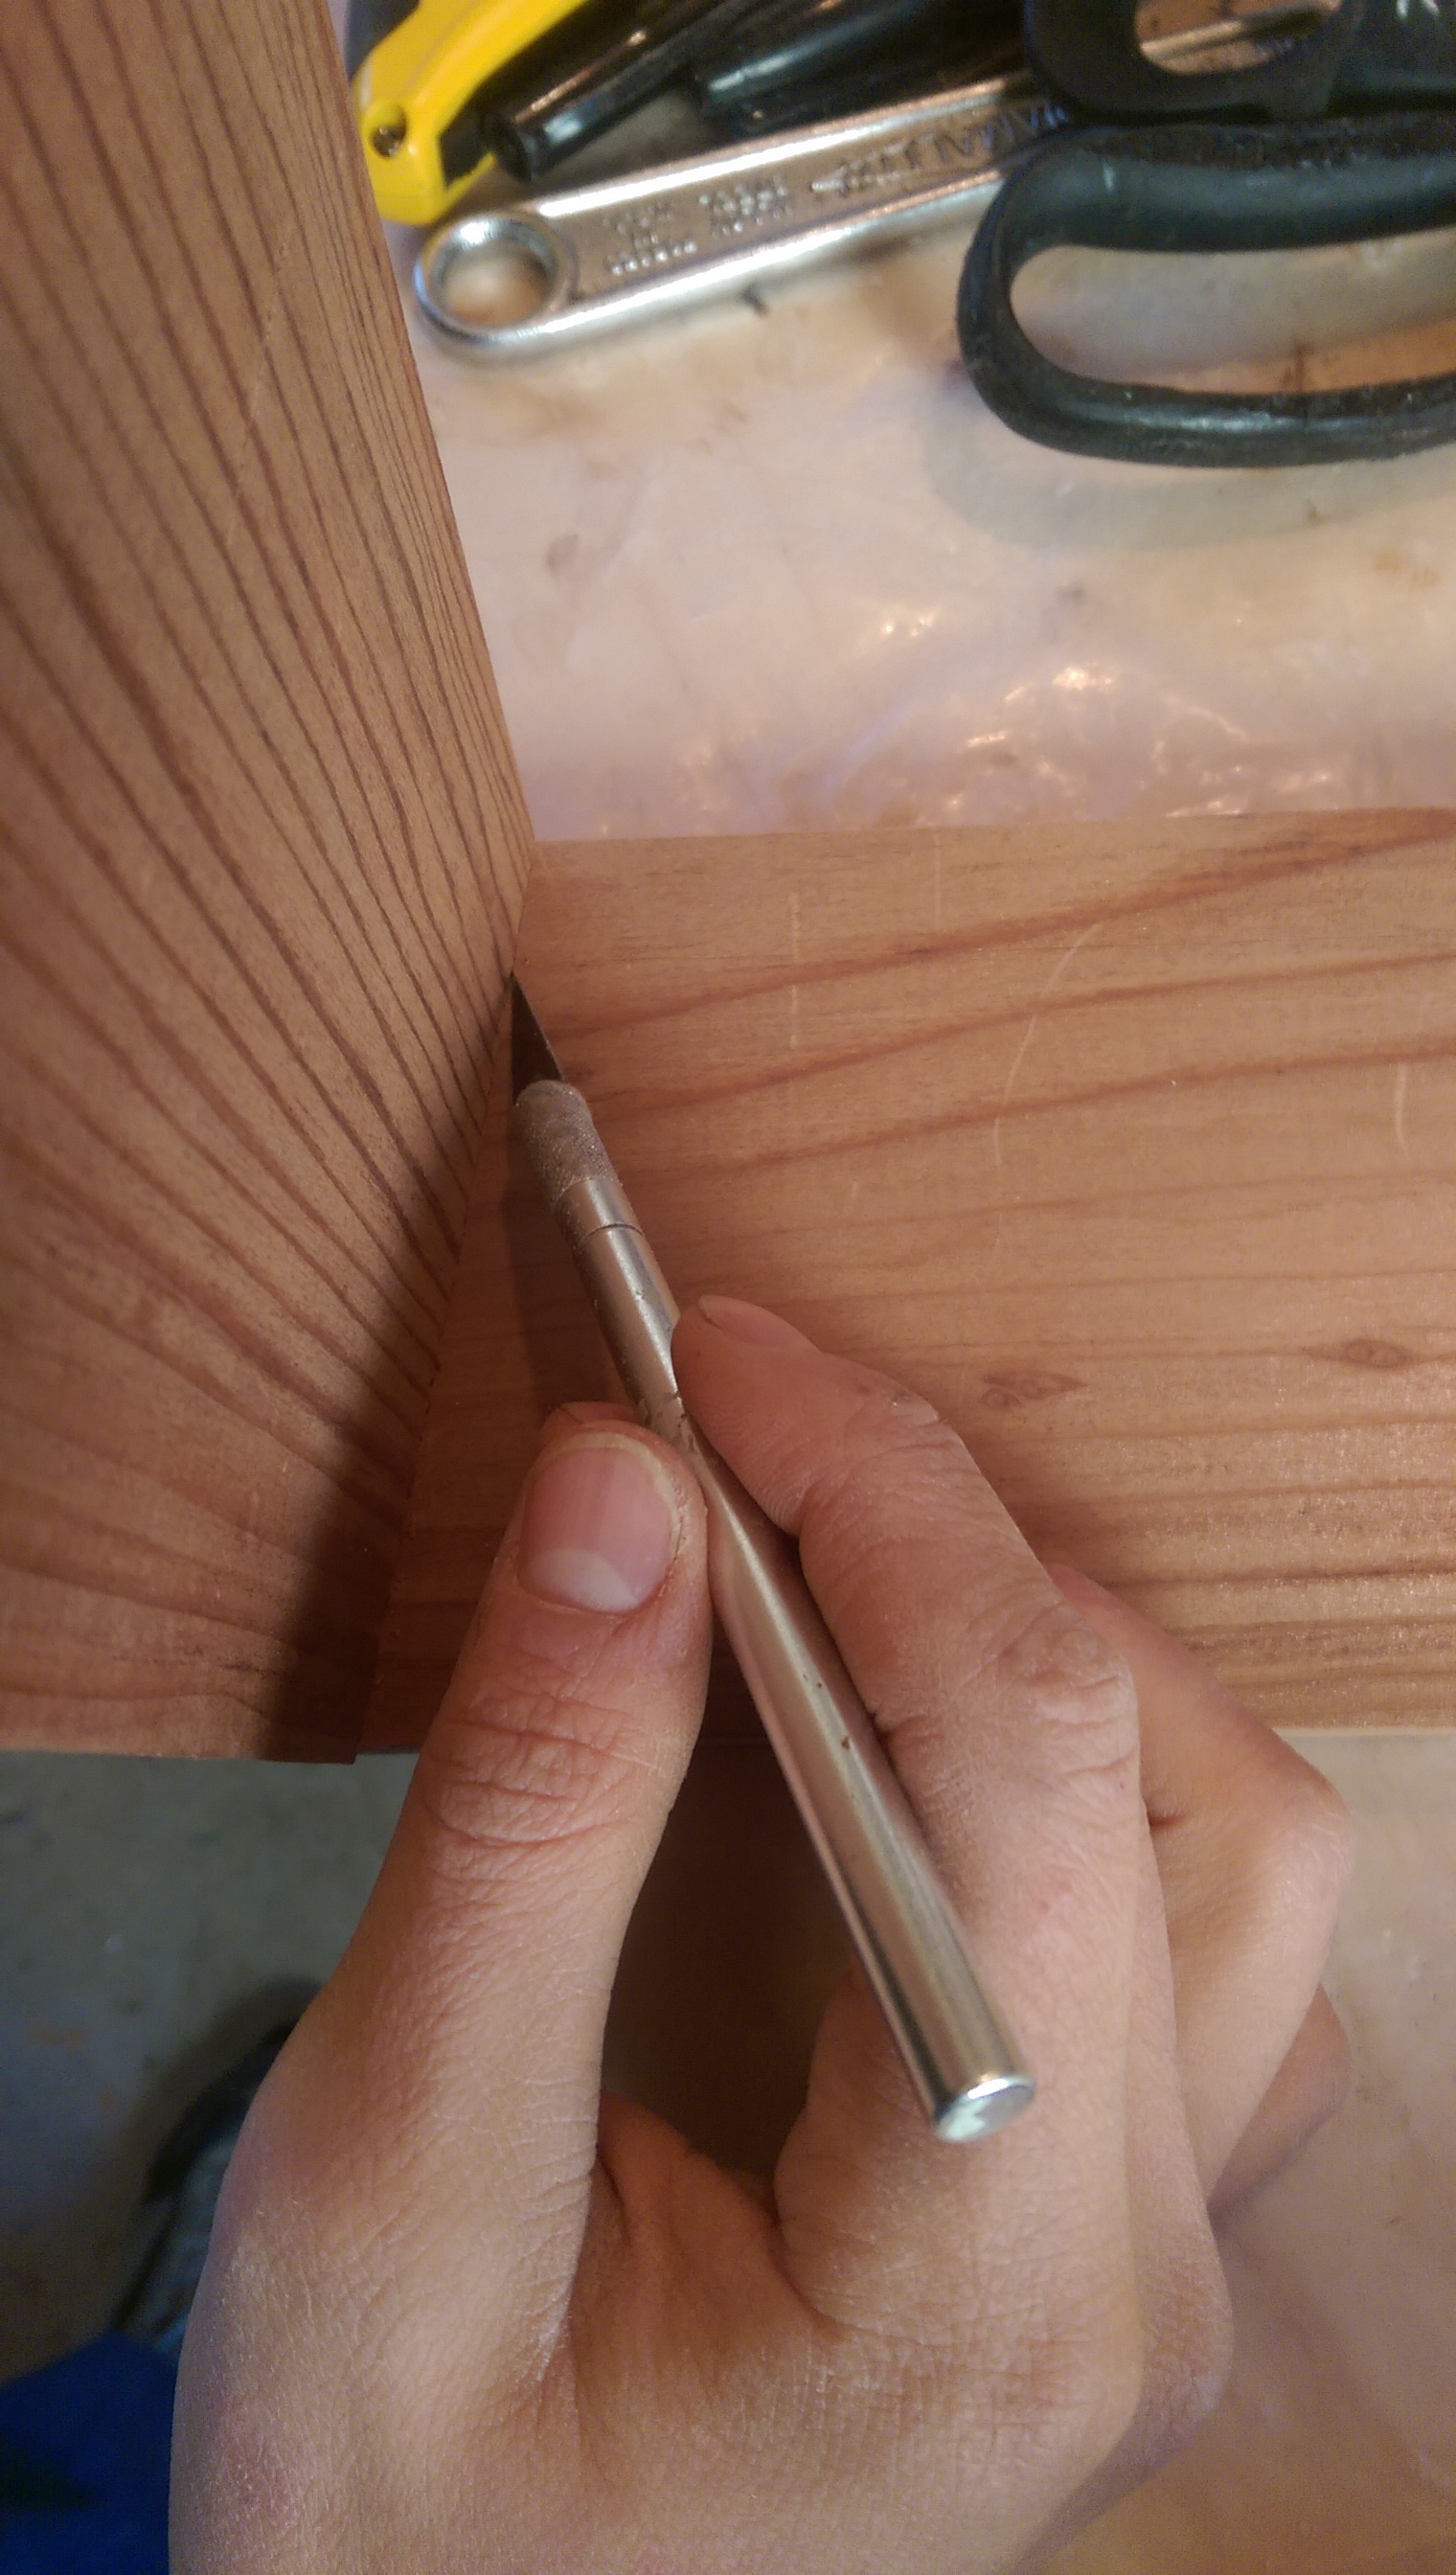  I used a hobby knife to score a line to accurately mark the thickness of the wood. This will give me a depth to cut the dovetails. What I learned later is that I should have cut the dovetails slightly deeper than this line. 